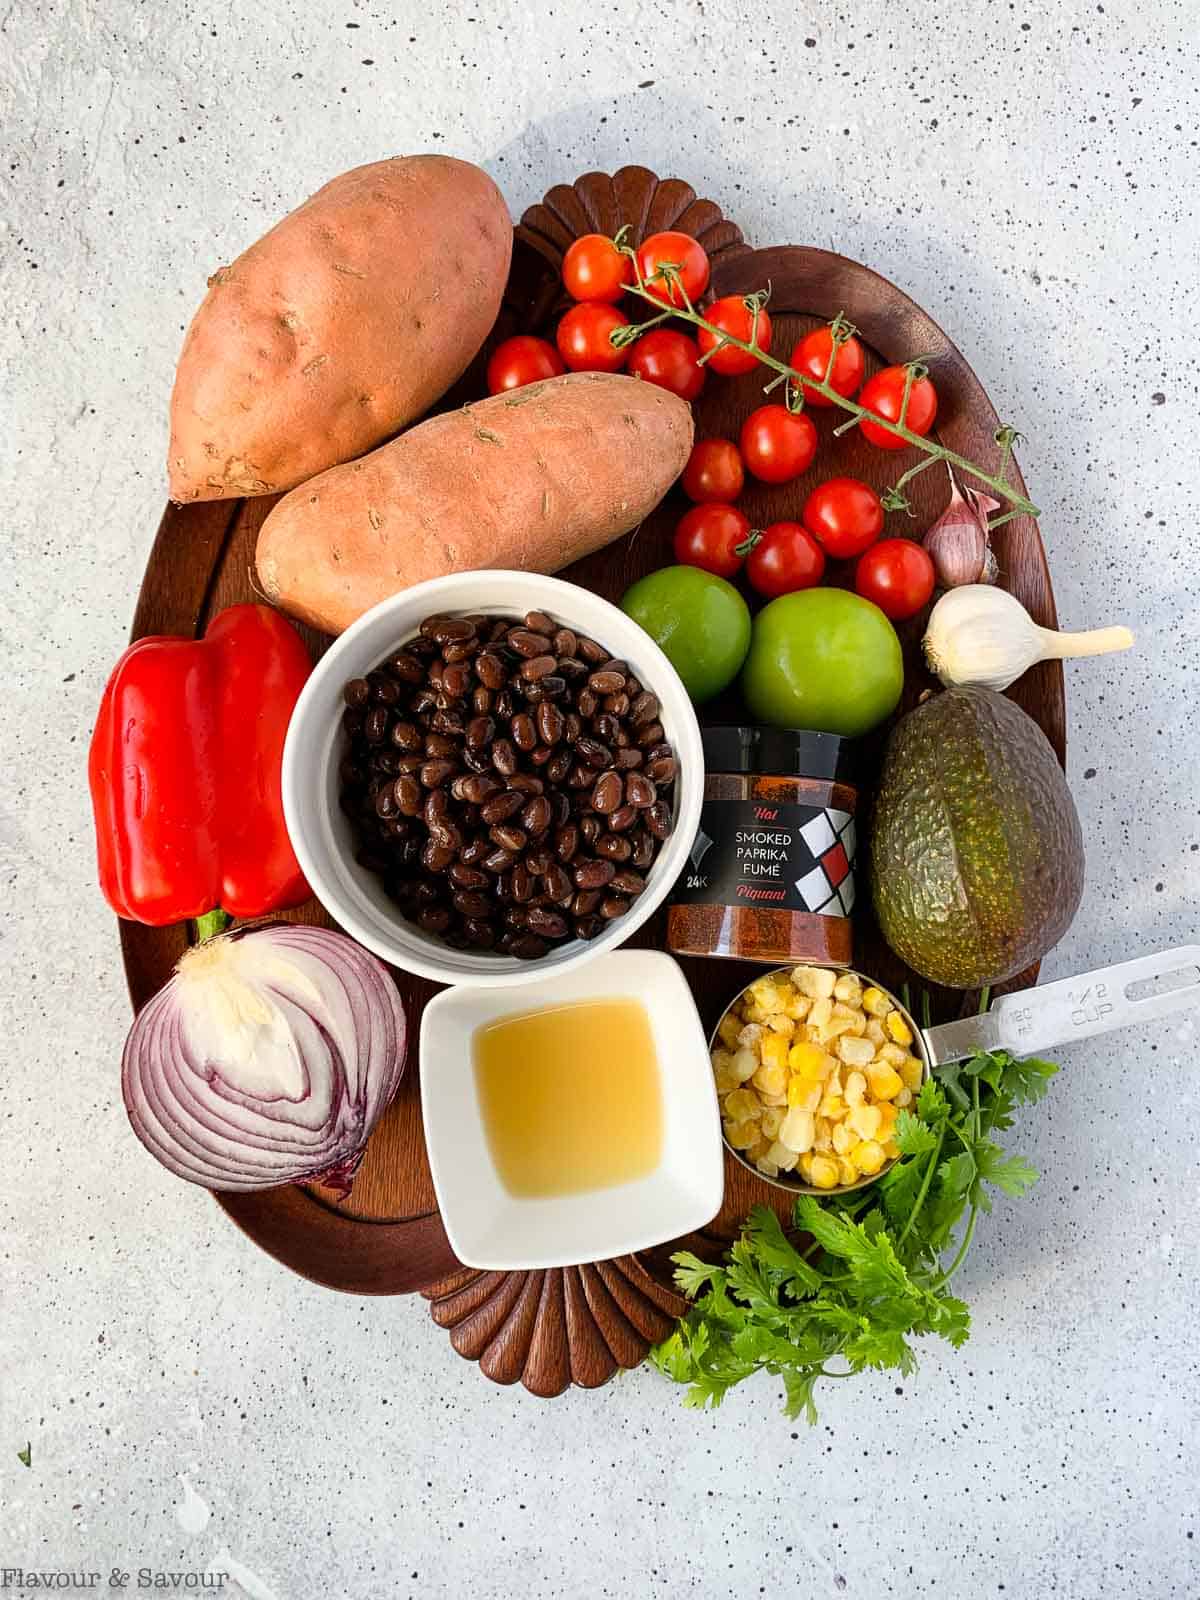 Ingredients for black bean stuffed sweet potatoes on a tray.